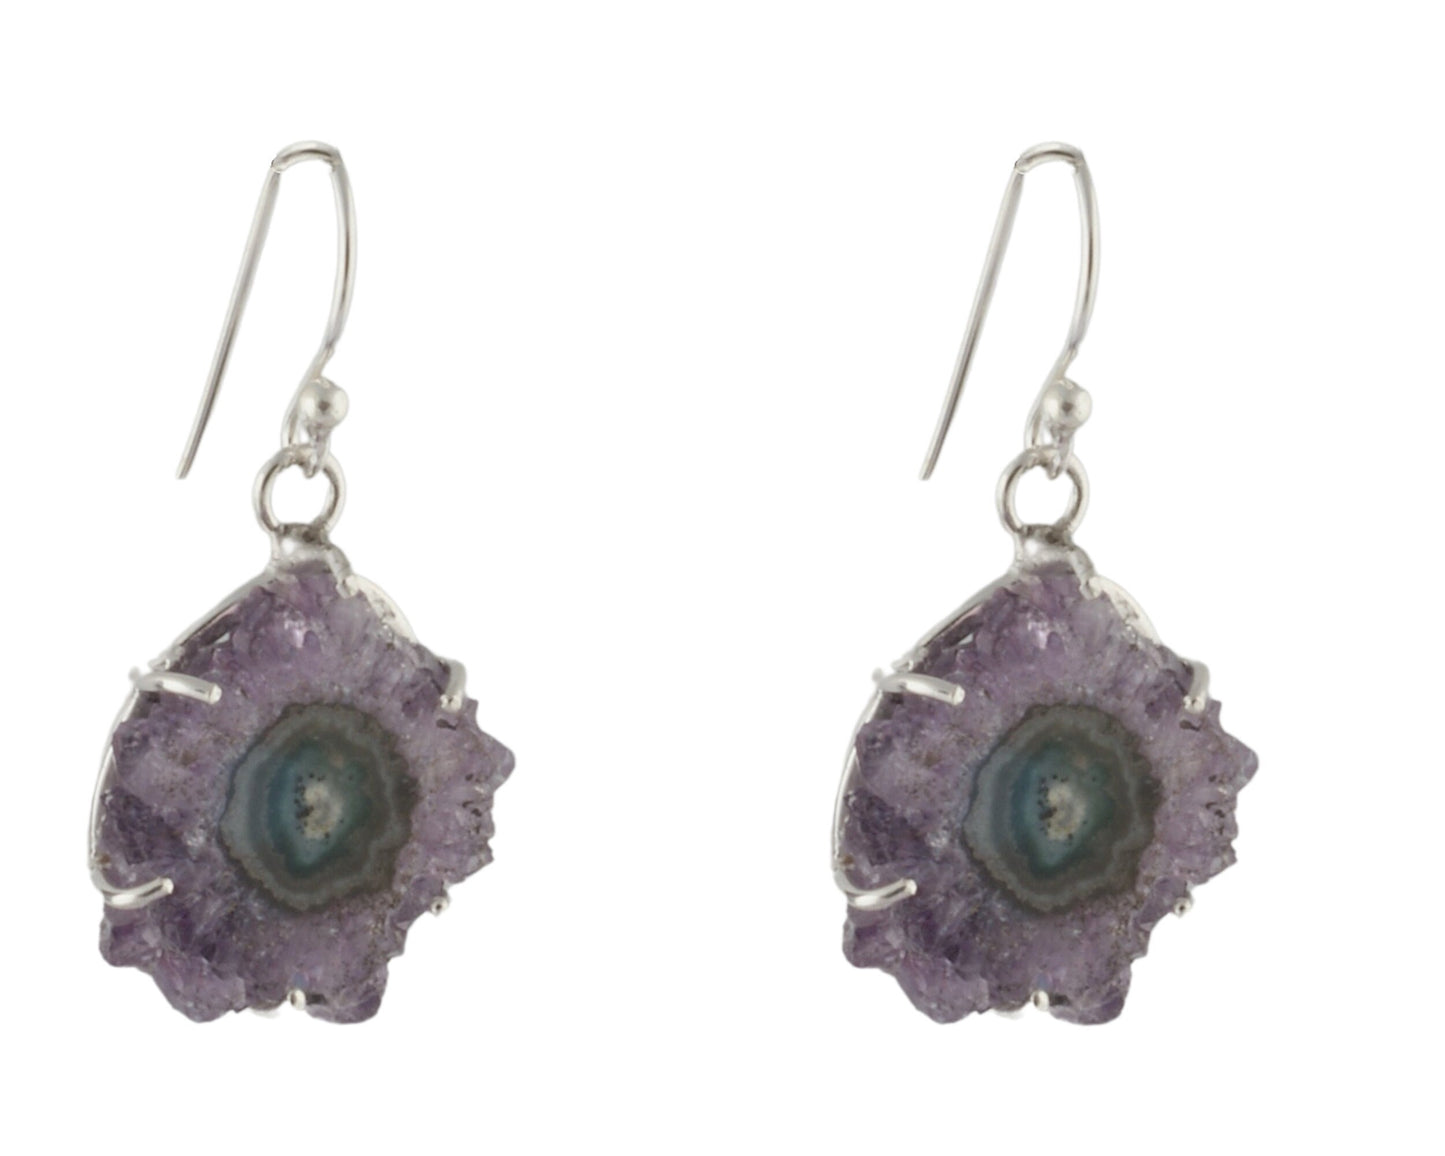 Solid 925 Sterling Silver Stalacite / Amethyst Drusy Dangle Earring in Silver High Finish. Gift for Her, Birthday/Anniversary/Wedding